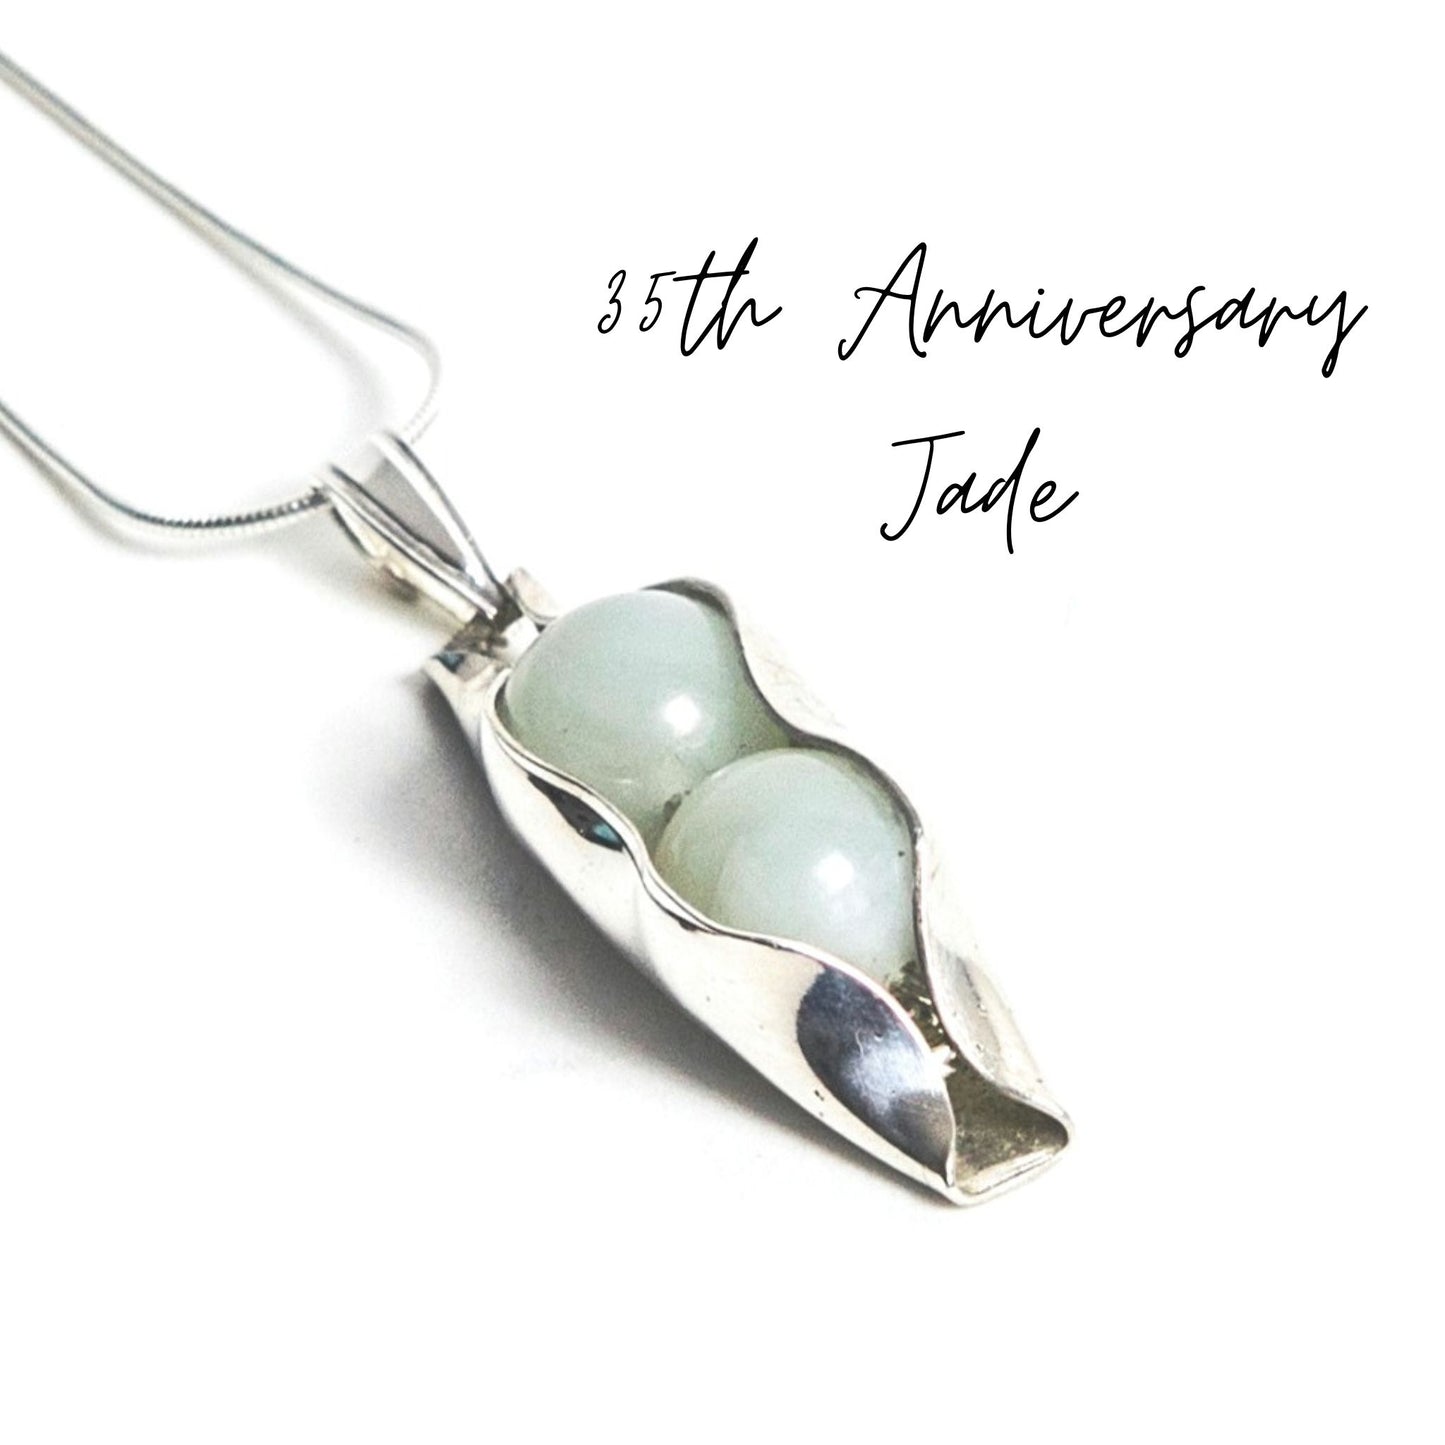 35th Wedding Anniversary | Jade Anniversary | Married for 35 years | Two Peas In A Pod | Engraving